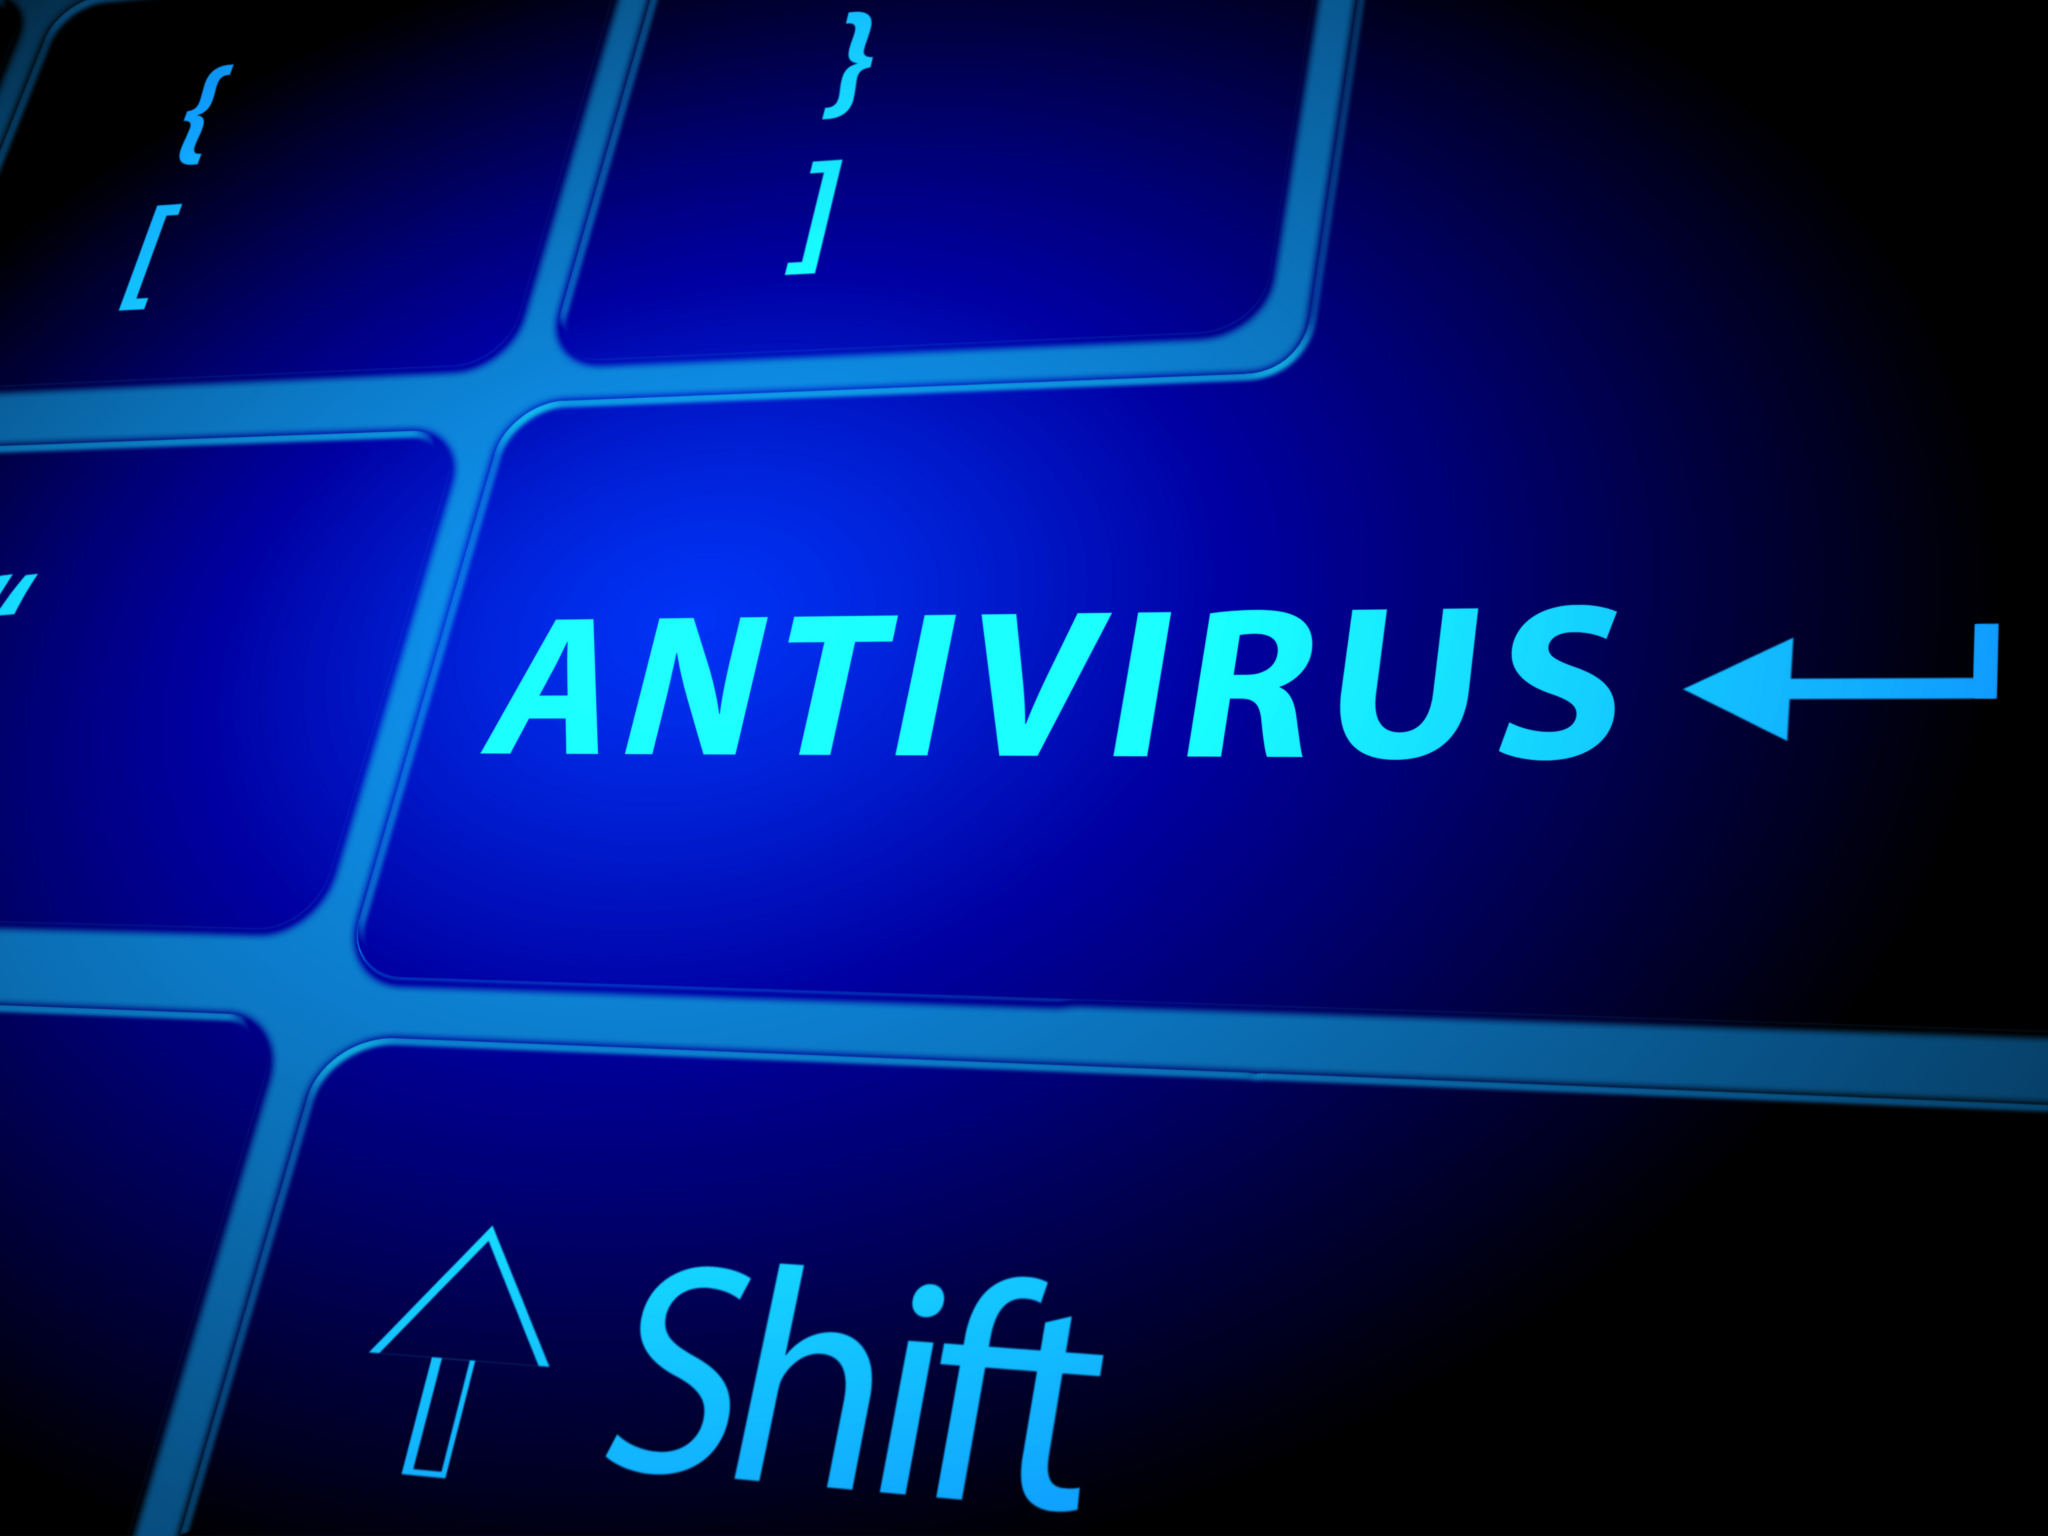 Finding the Best Antivirus for Enterprise and What Qualities to Look for